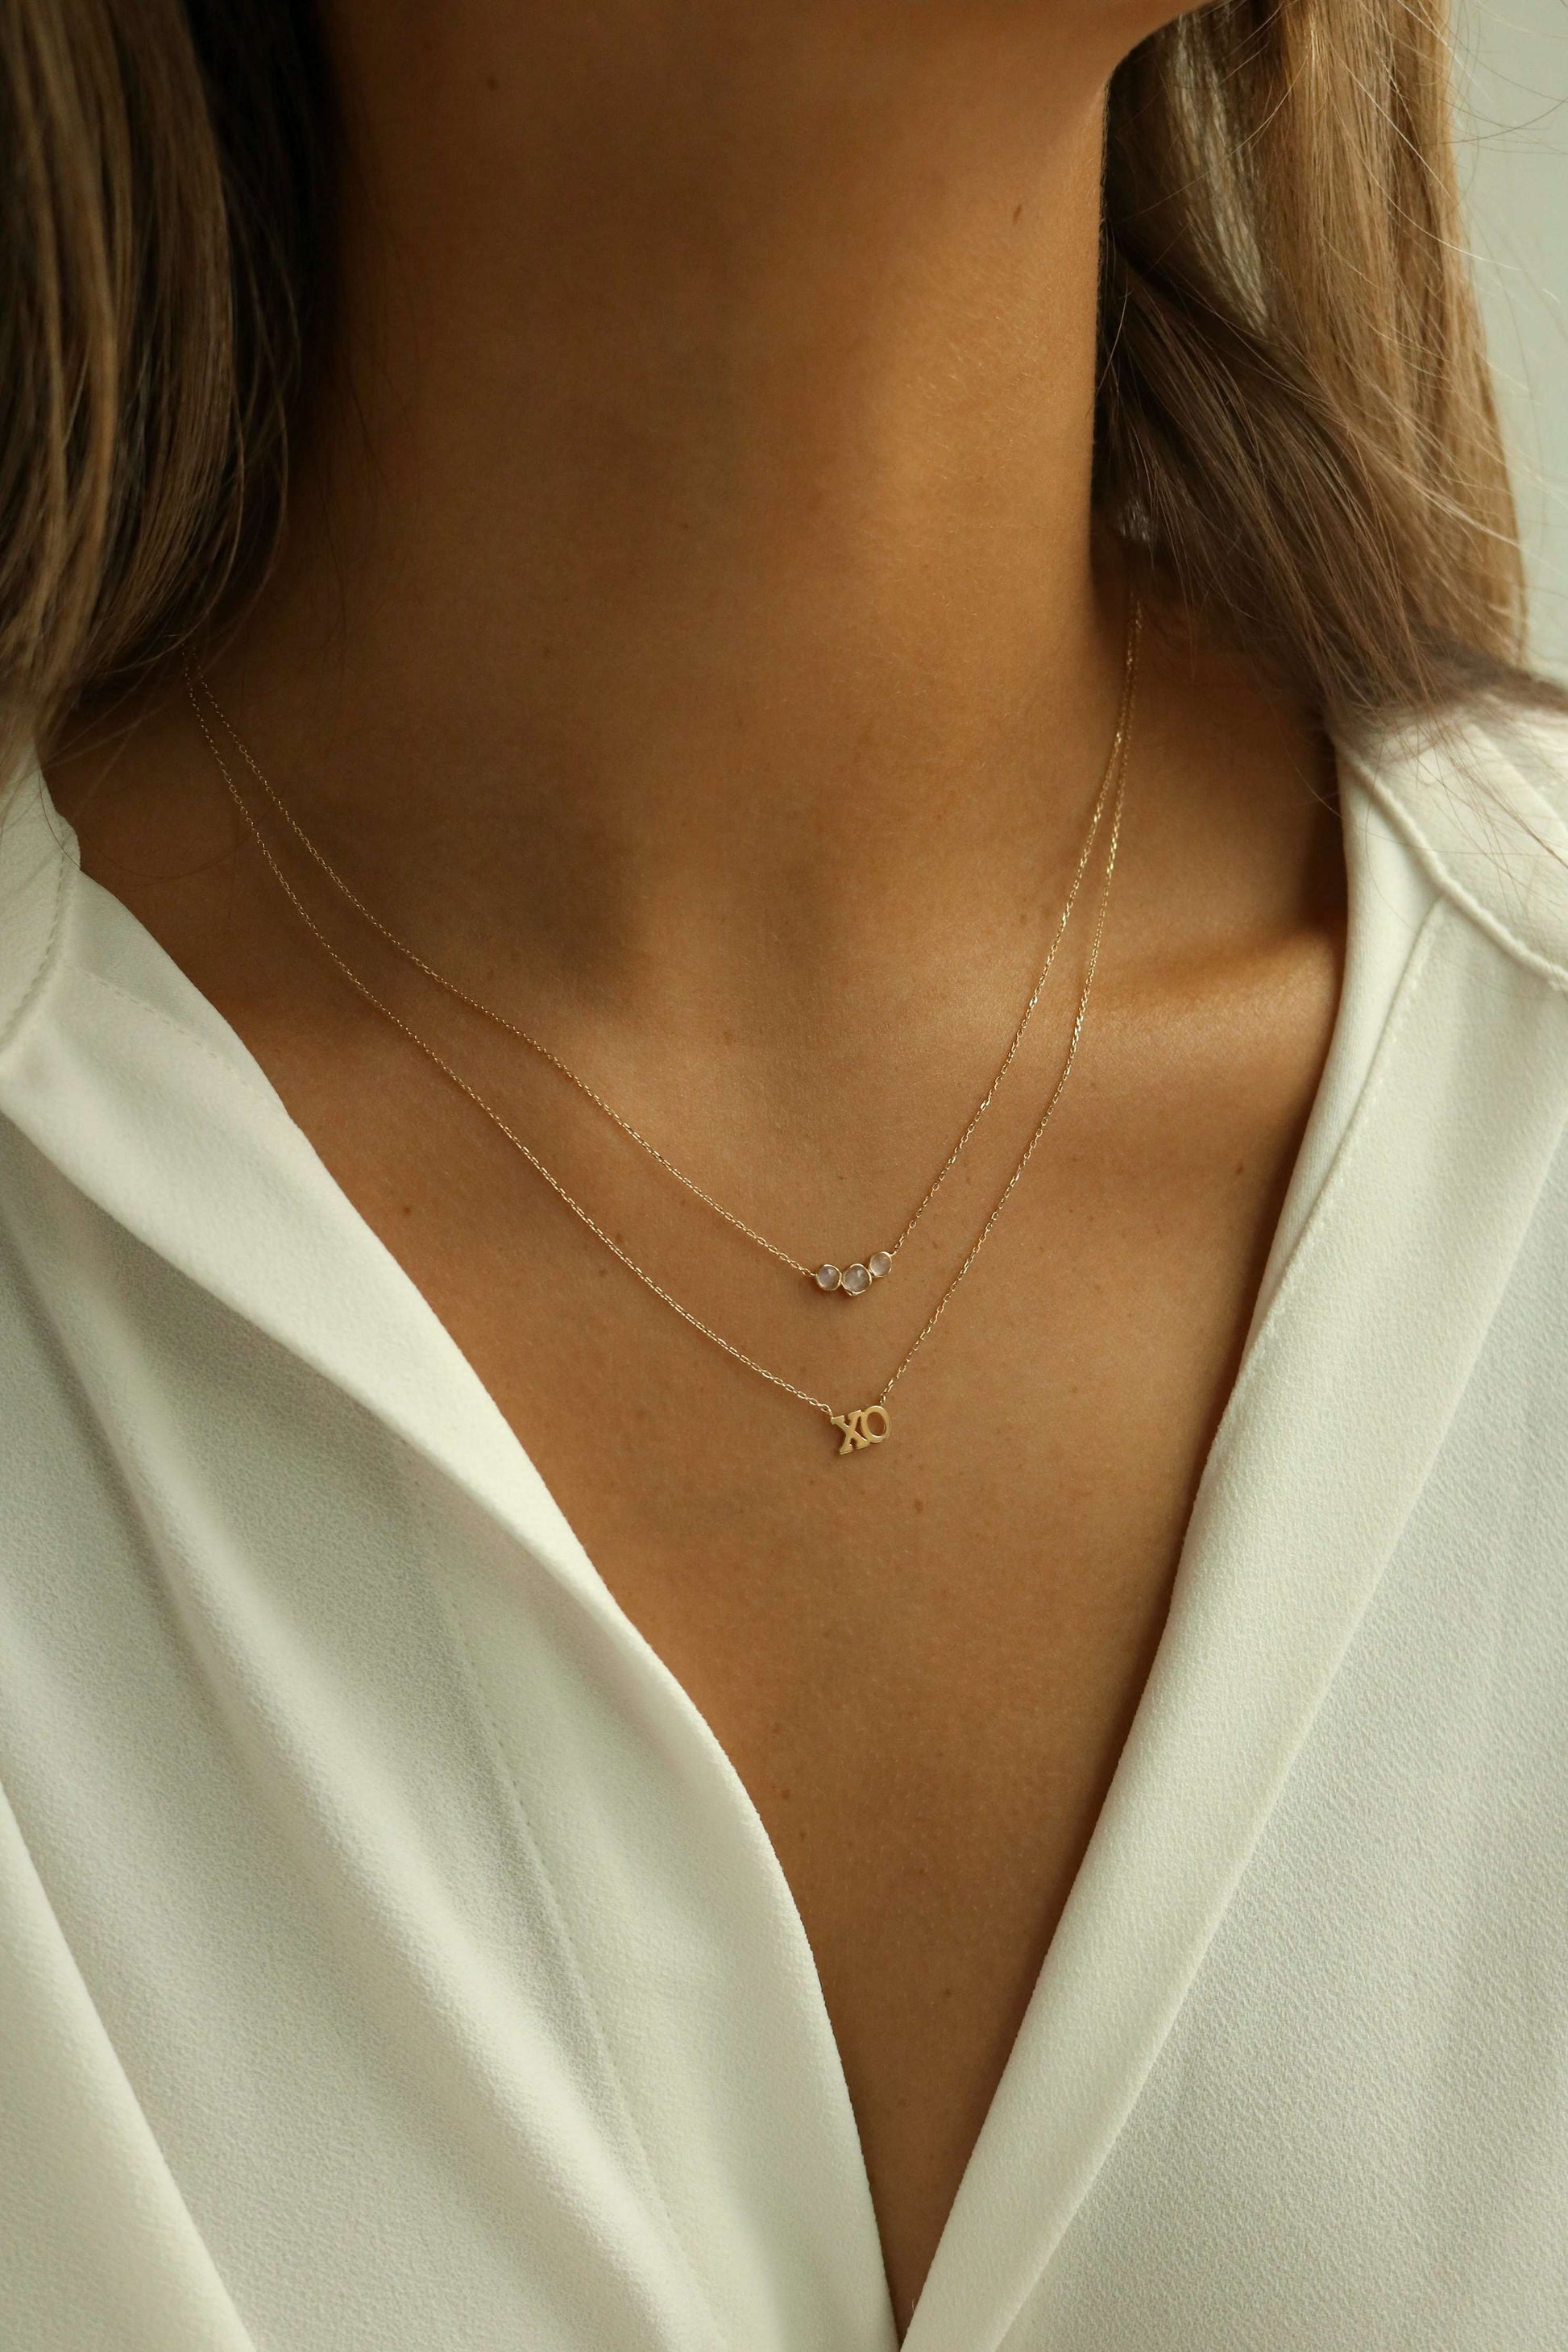 14k gold XO necklace layered with a triple moonstone pendant on tan skin collarbones